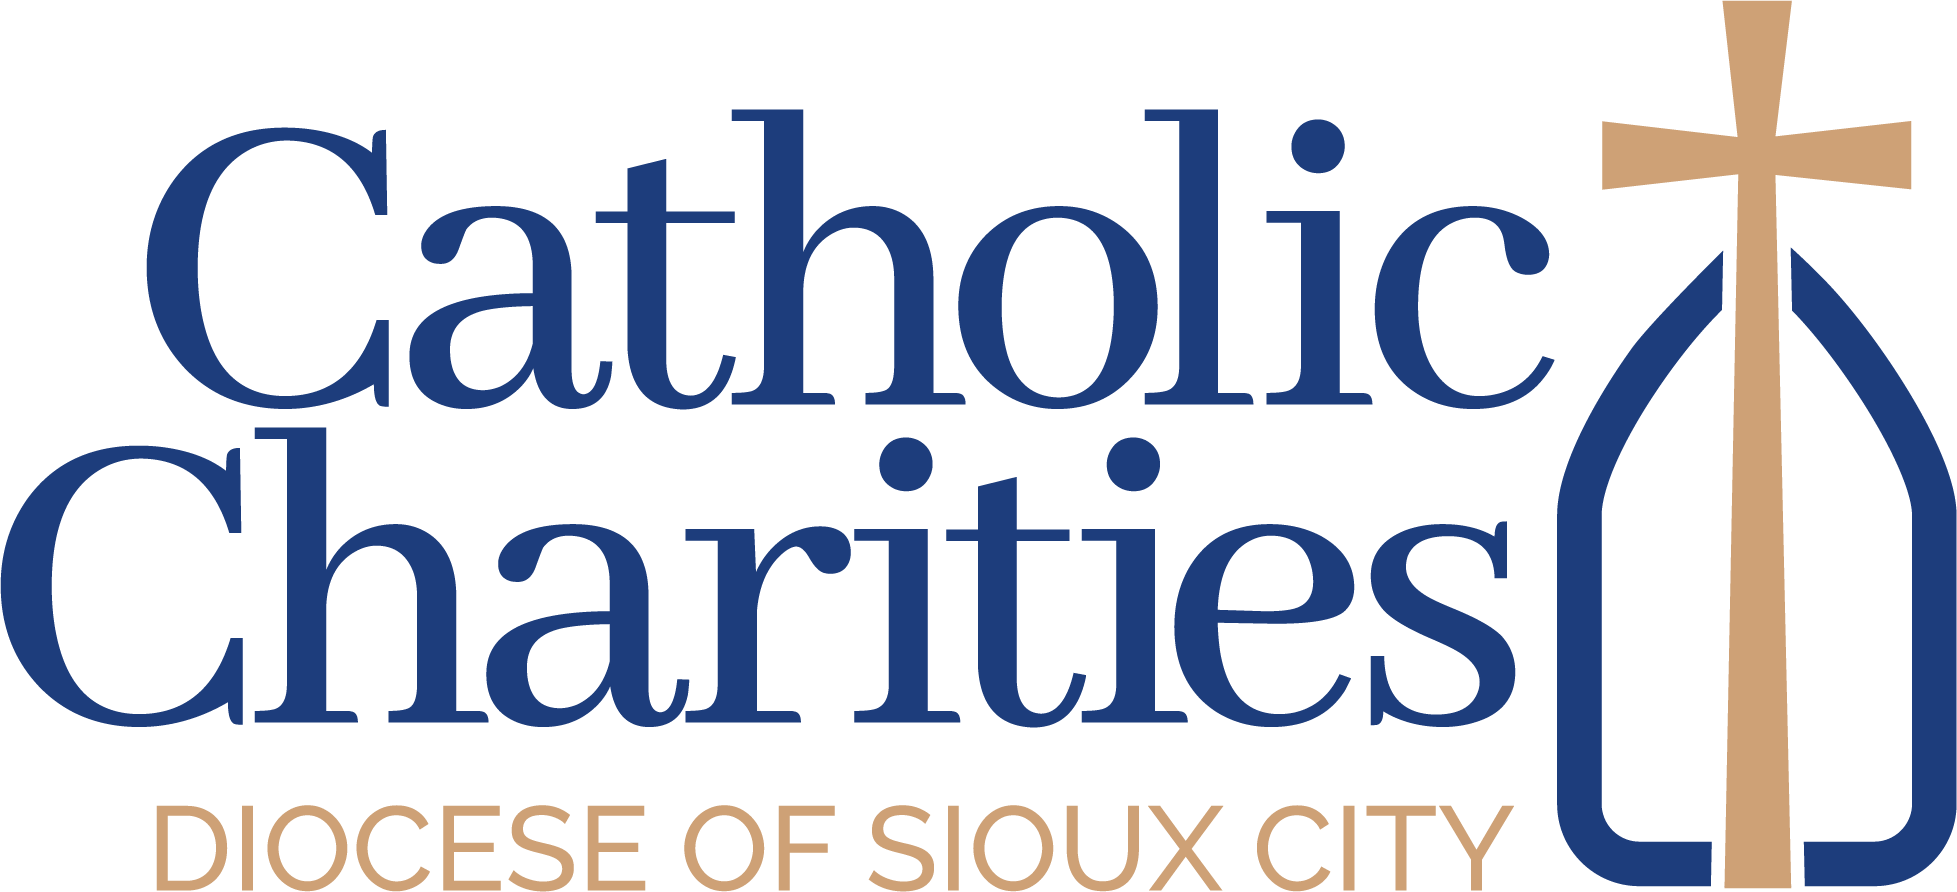 Catholic Charities of the Diocese of Sioux City - Fort Dodge Office's Logo